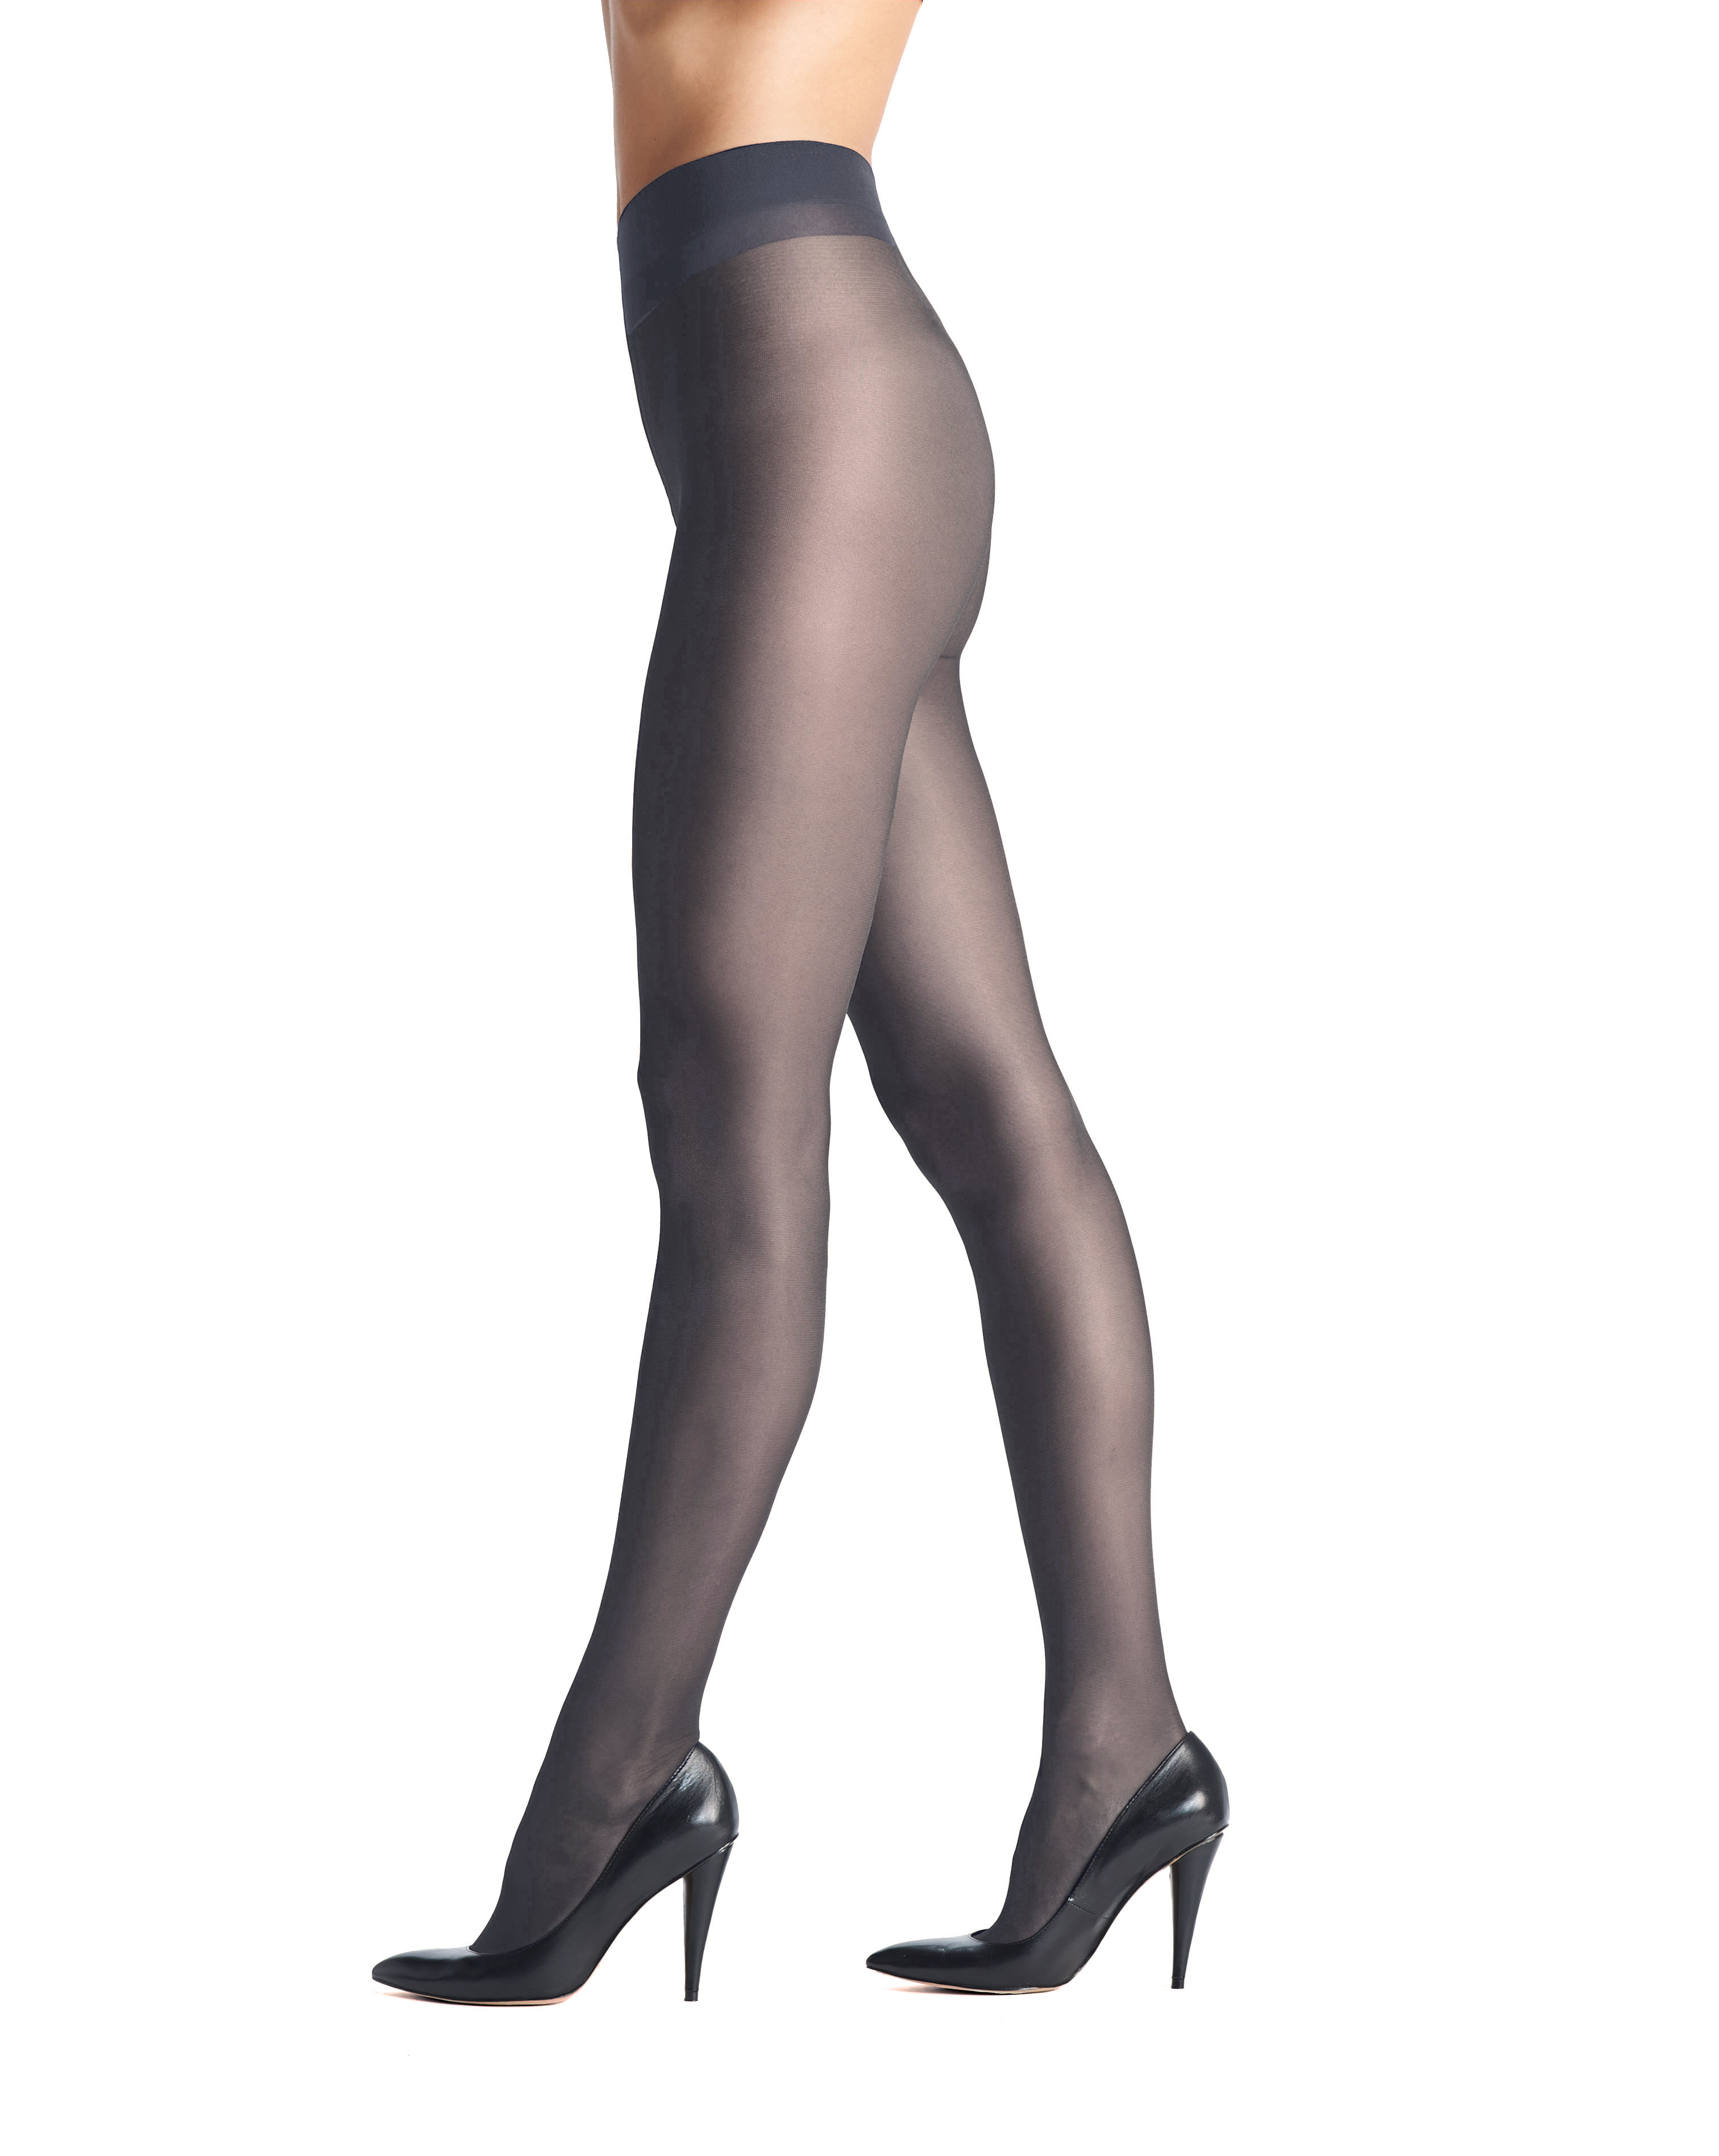 Magie Tights